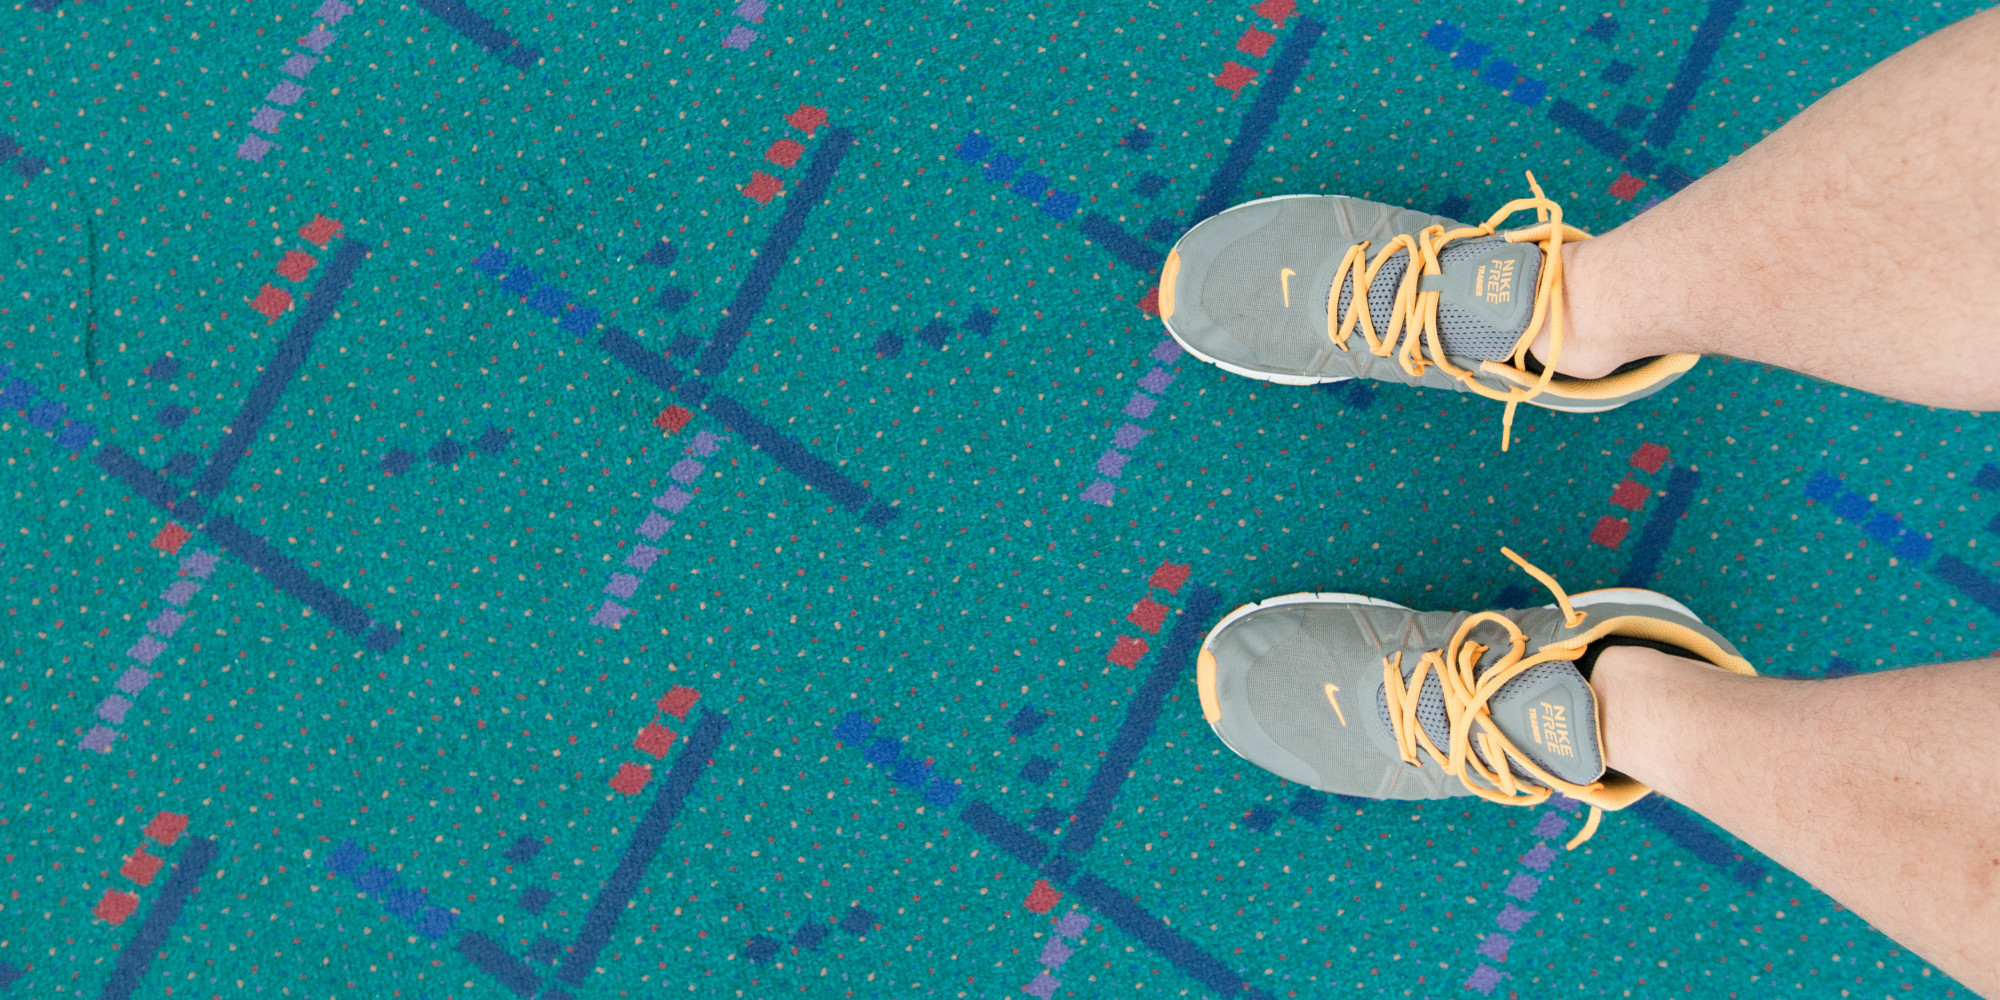 Portlanders Are Mourning The Loss Of Their Beloved Airport Carpet. Yes, You Read That Right